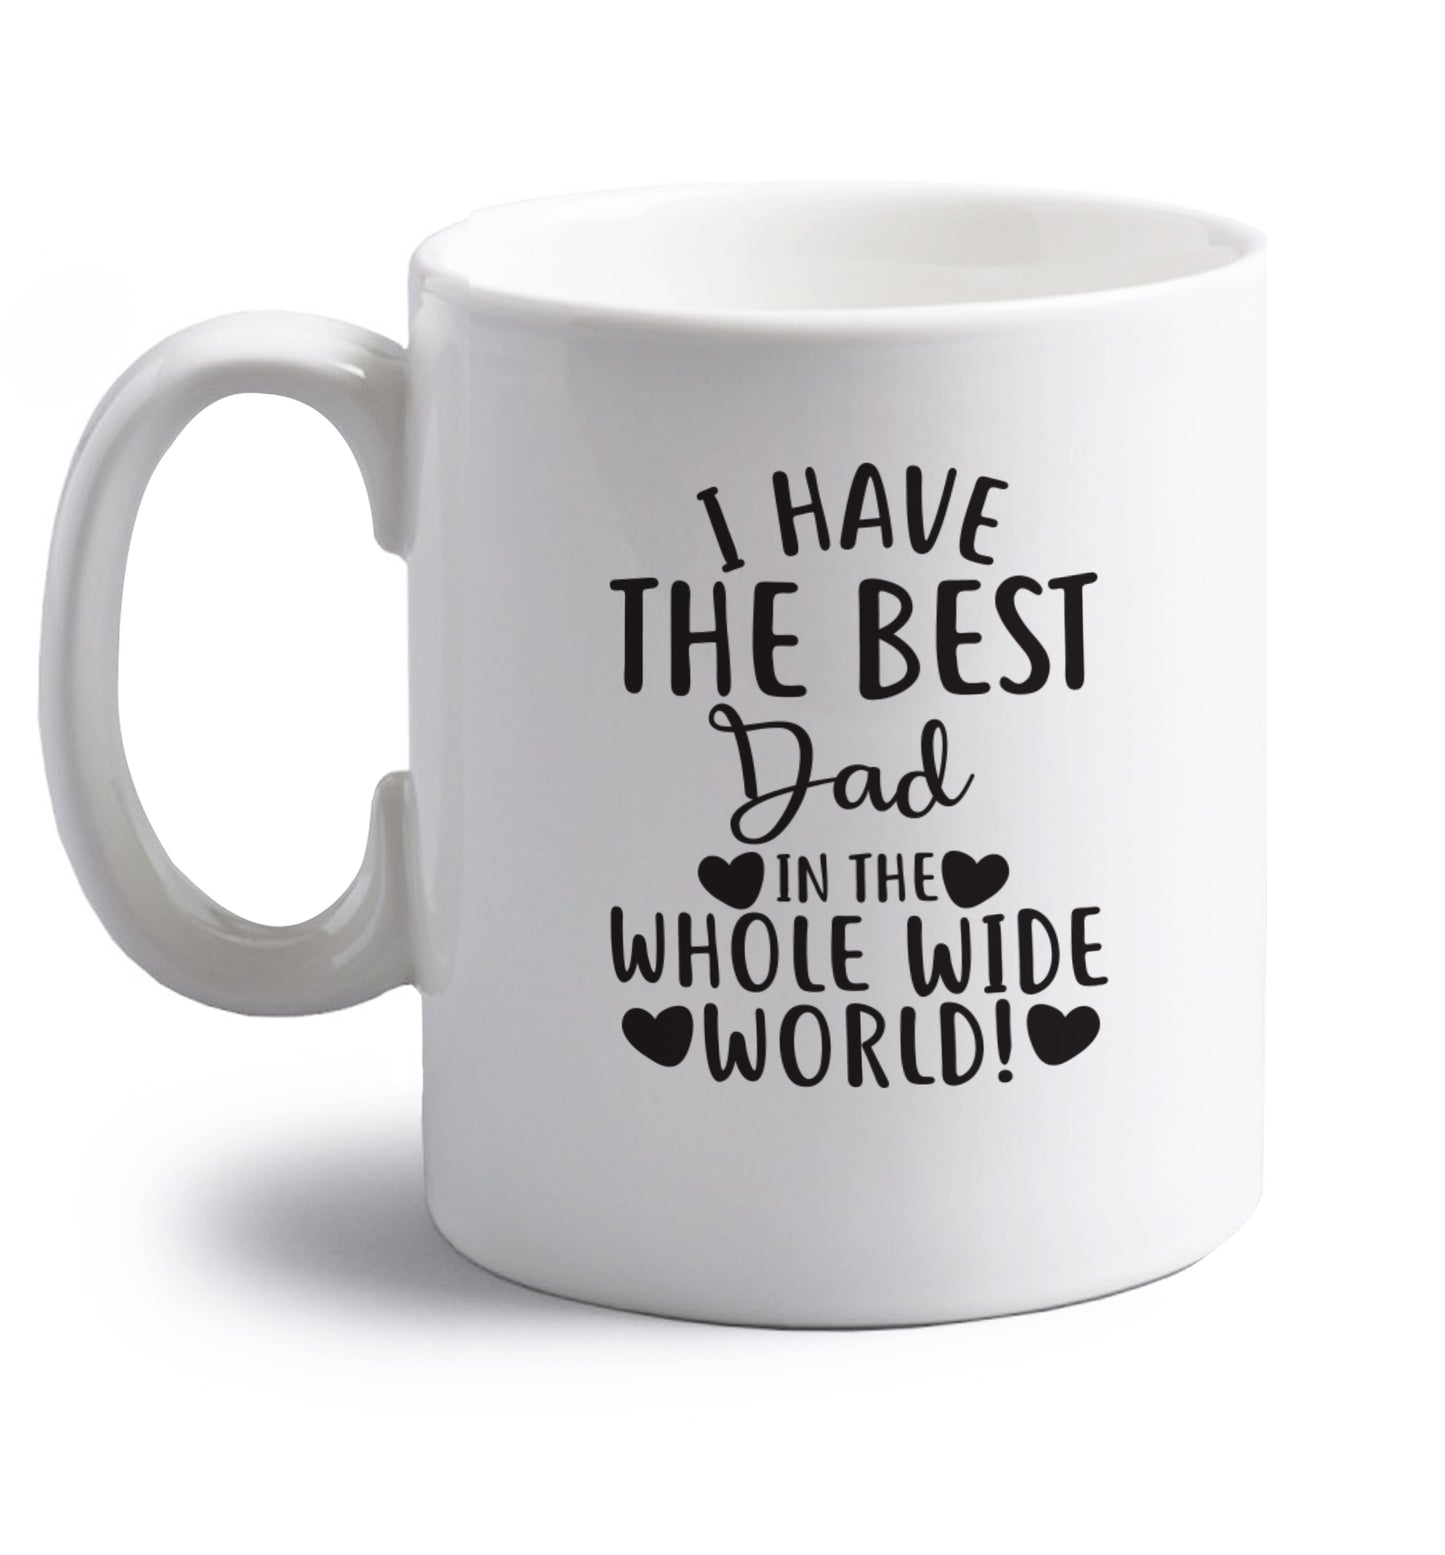 I have the best dad in the whole wide world! right handed white ceramic mug 